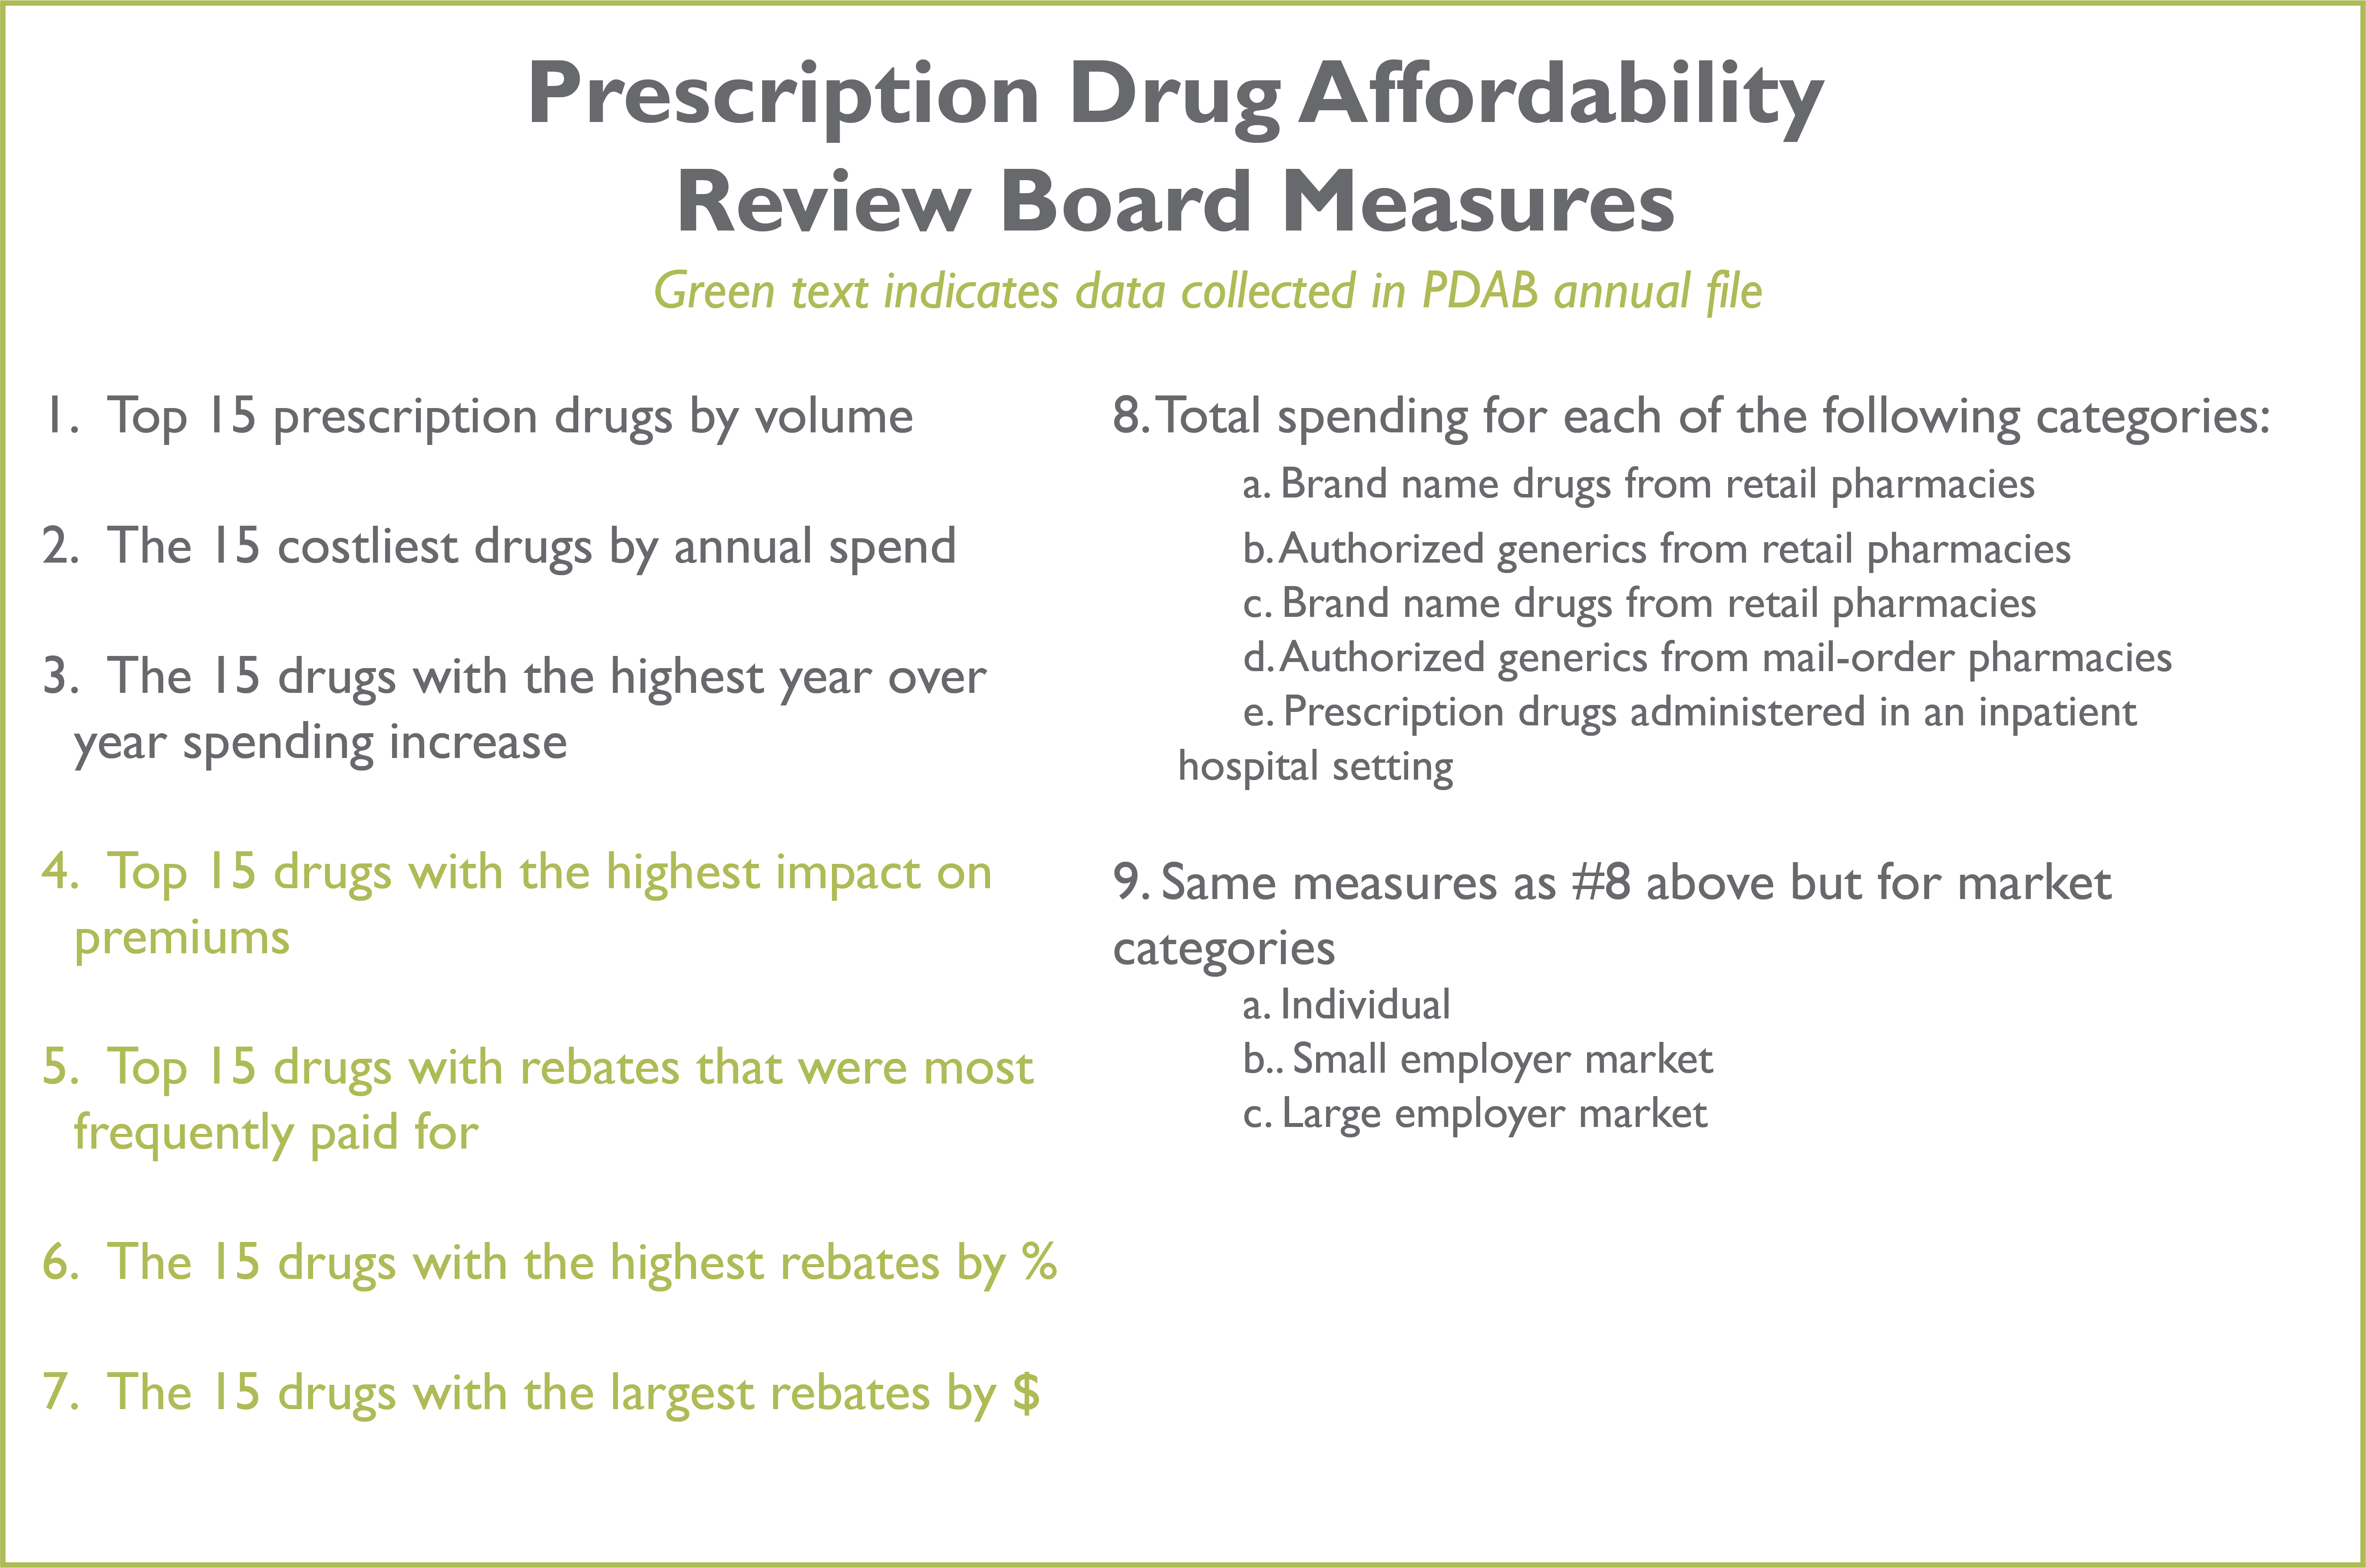 Prescription Drug Affordability Review Board Measures: 
1. Top 15 prescription drugs by volume 
2. The 15 costliest drugs by annual spend 
3. The 15 drugs with the highest year-over-year spending increase 
4. Top 15 drugs with the highest impact on premiums (data collected in PDAB annual file) 
5. Top 15 drugs with rebates that were most frequently paid for (data collected in PDAB annual file) 
6. The 15 drugs with the highest rebates by % (data collected in PDAB annual file) 
7. The 15 drugs with the largest rebates by $ (data collected in PDAB annual file) 
8. Total spending for each of the following categories:
		a. Brand name drugs from retail pharmacies 
		b. Authorized generics from retail pharmacies
		c. Brand name drugs from retail pharmacies 
		d. Authorized generics from mail-order pharmacies 
		e. Prescription drugs administered in an inpatient hospital setting 
9. Same measures as #8 above but for market 
categories 
		a. Individual
		b.. Small employer market
		c. Large employer market 